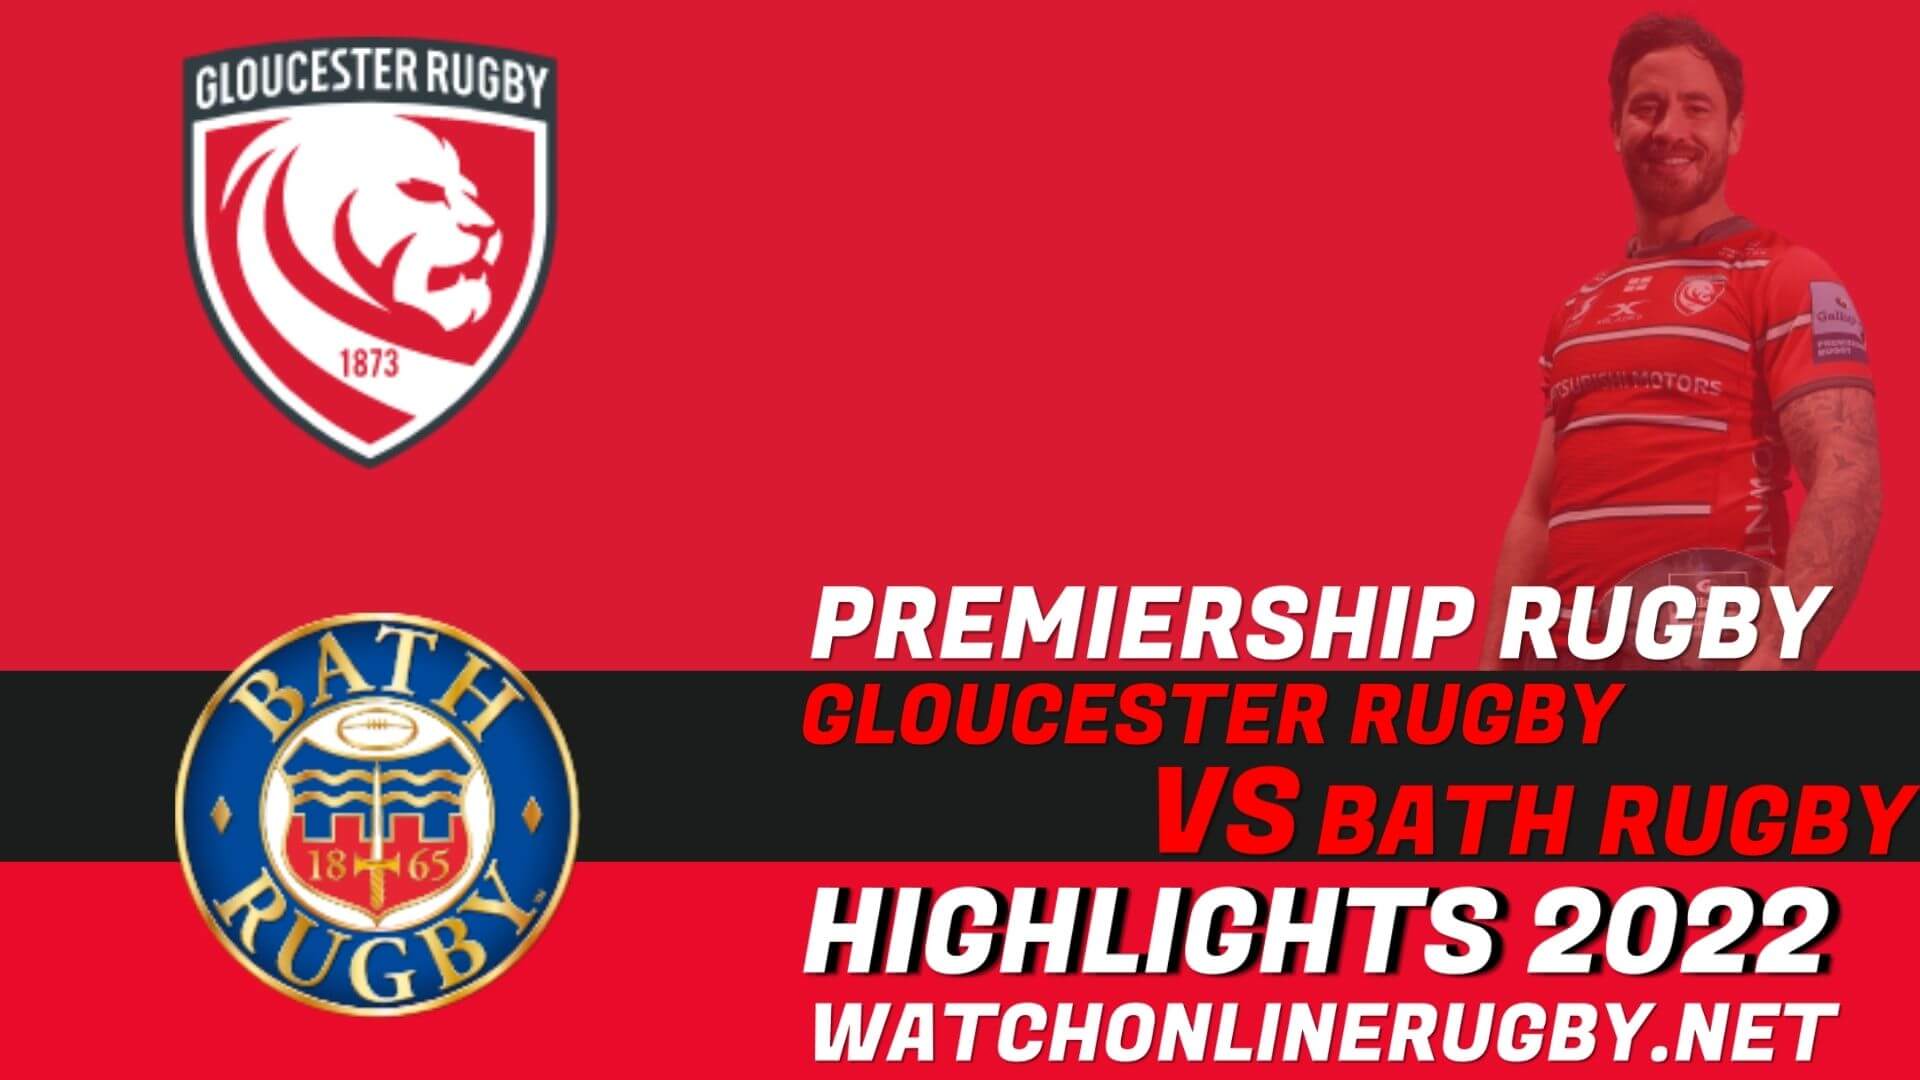 Gloucester Rugby Vs Bath Rugby Premiership Rugby 2022 RD 24